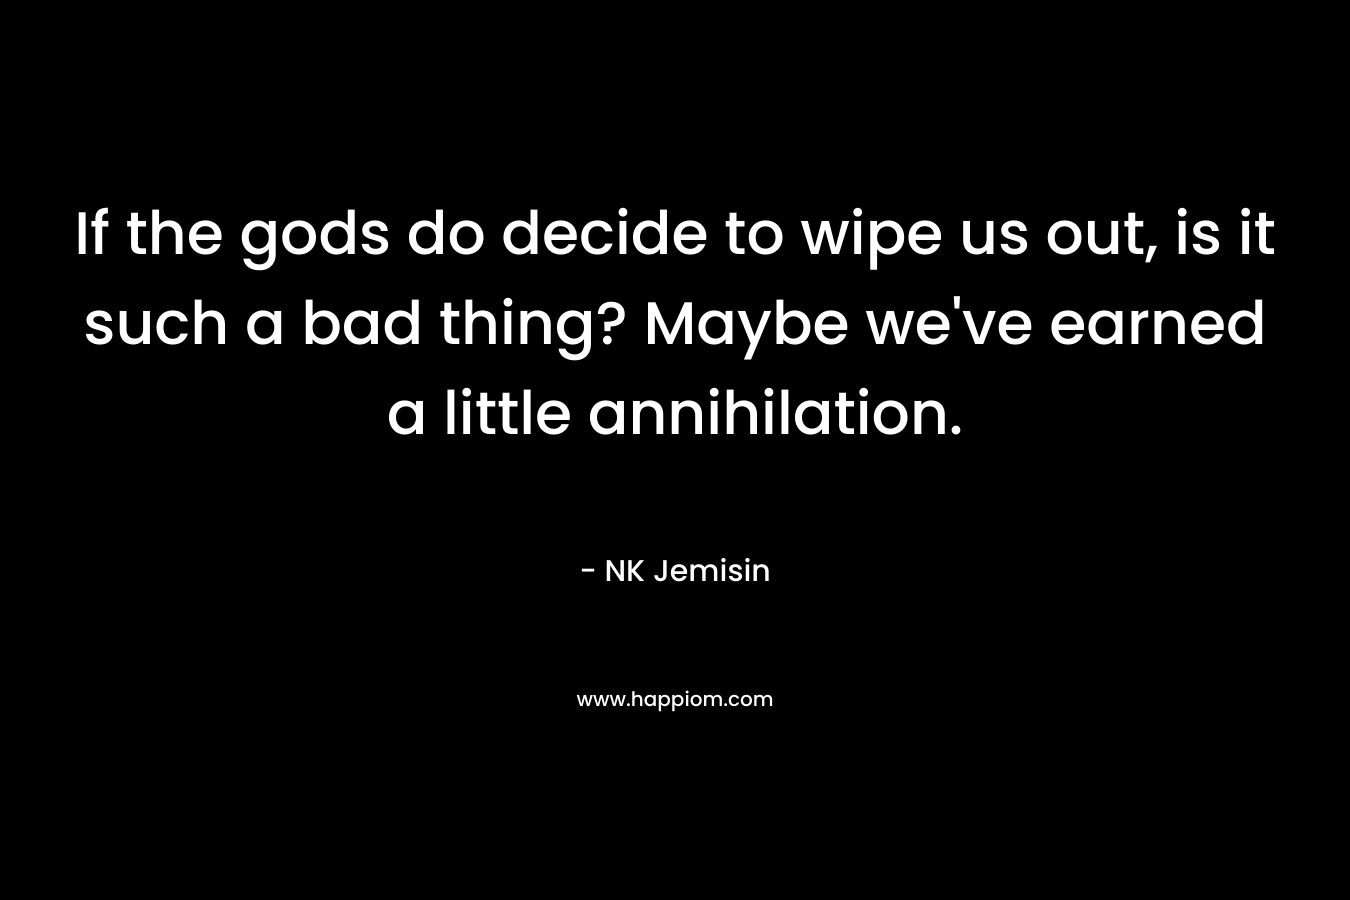 If the gods do decide to wipe us out, is it such a bad thing? Maybe we've earned a little annihilation.